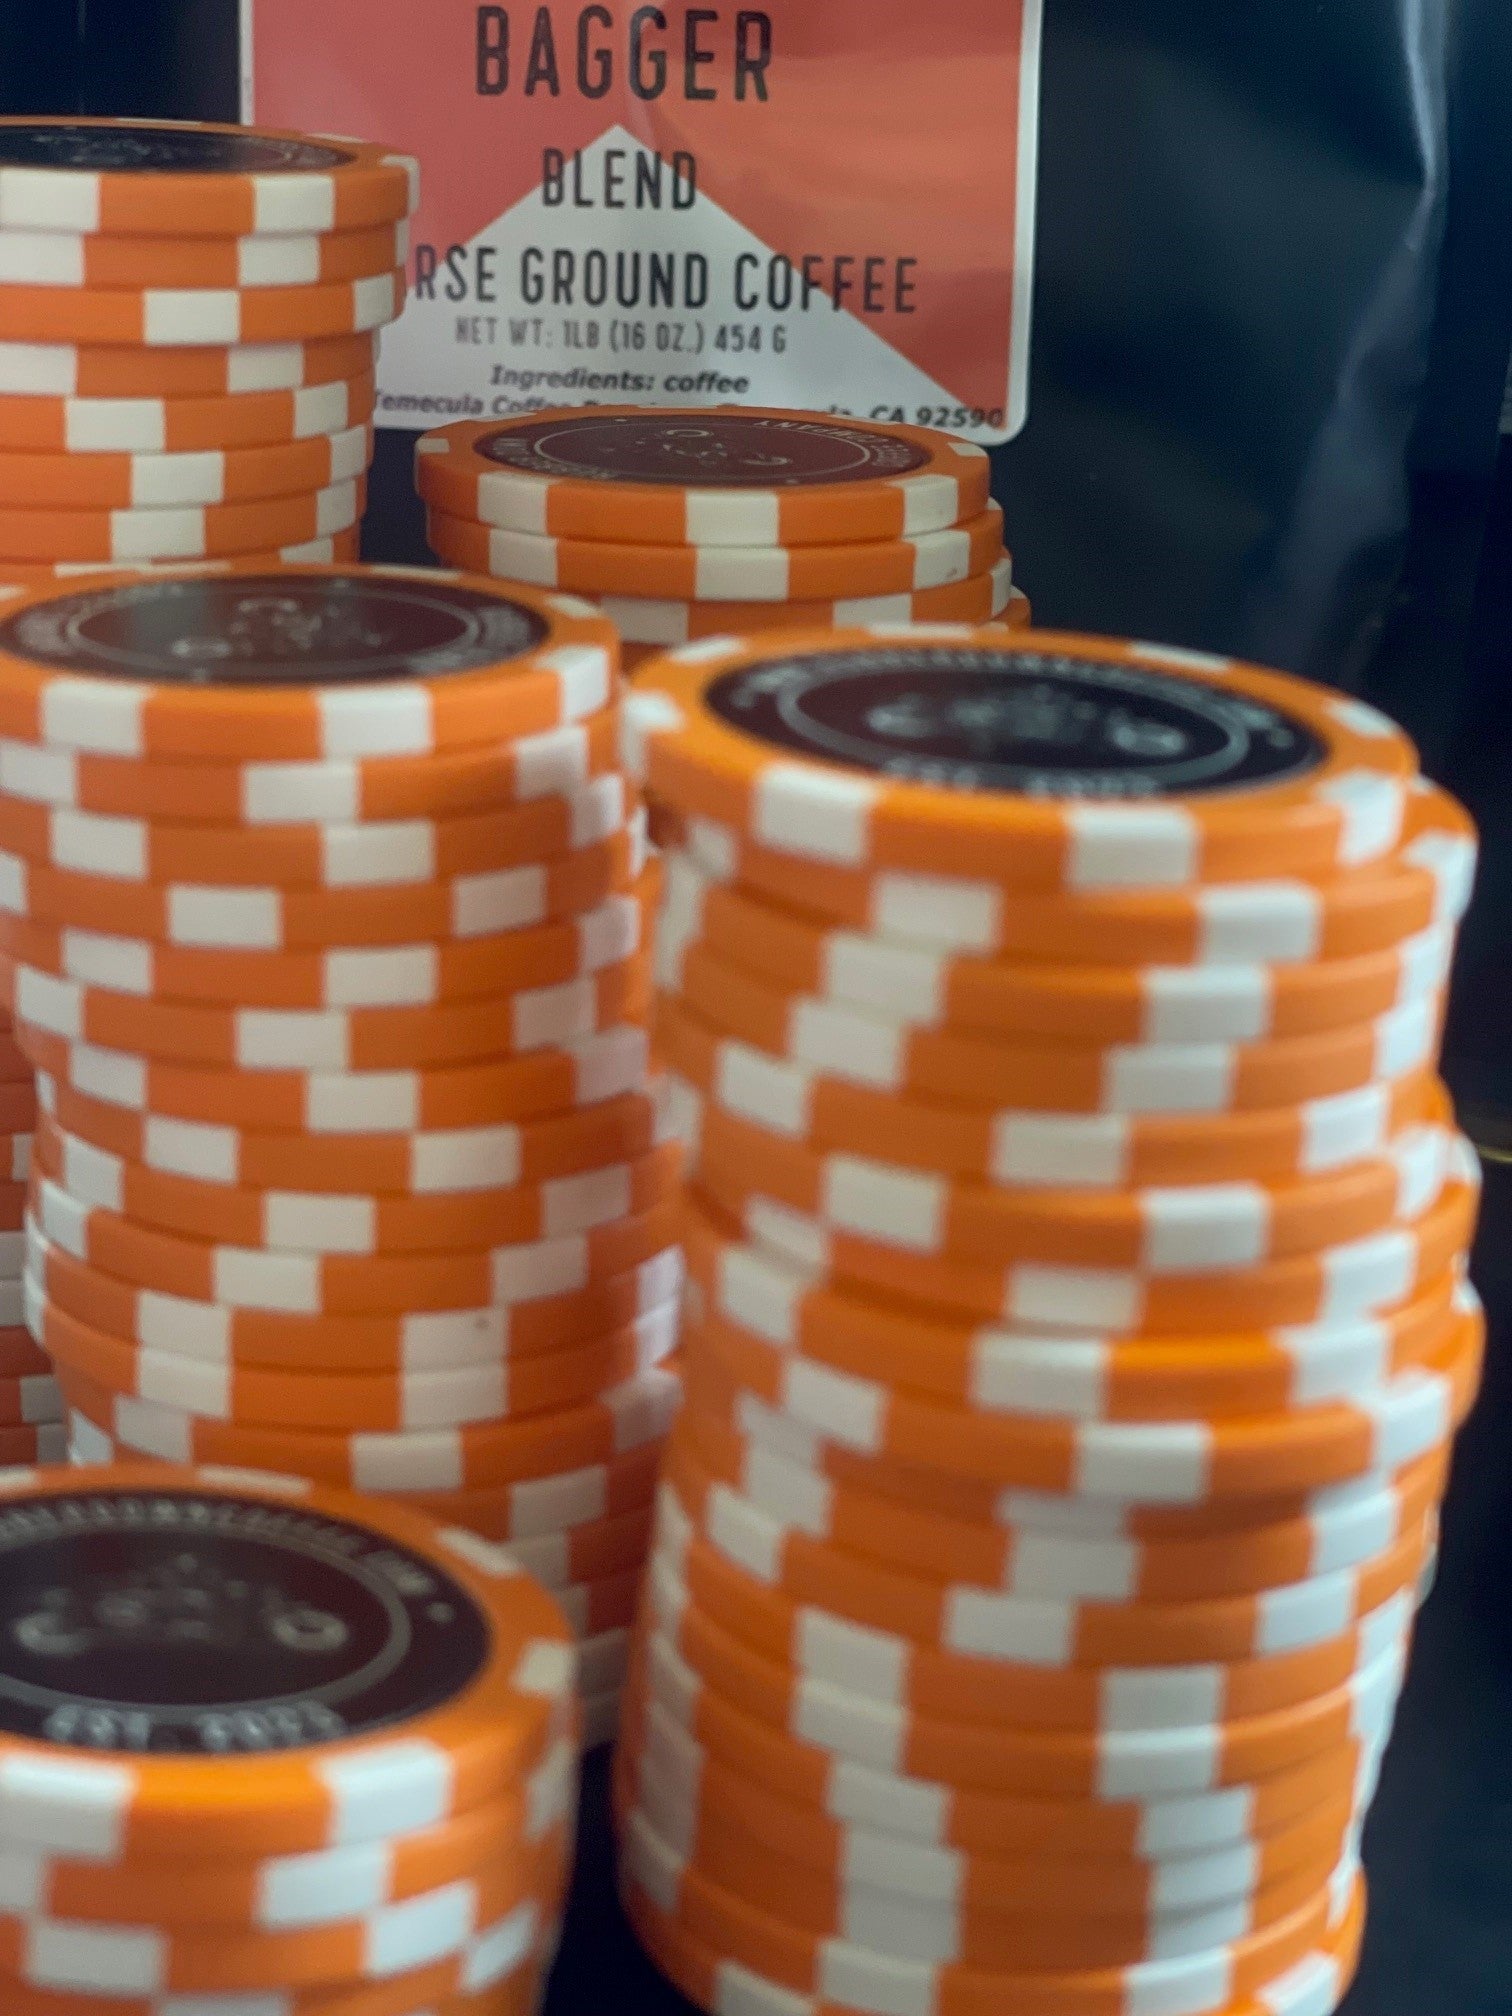 Rubber Down Coffee Clay Poker Chip - Rubber Down Coffee Company